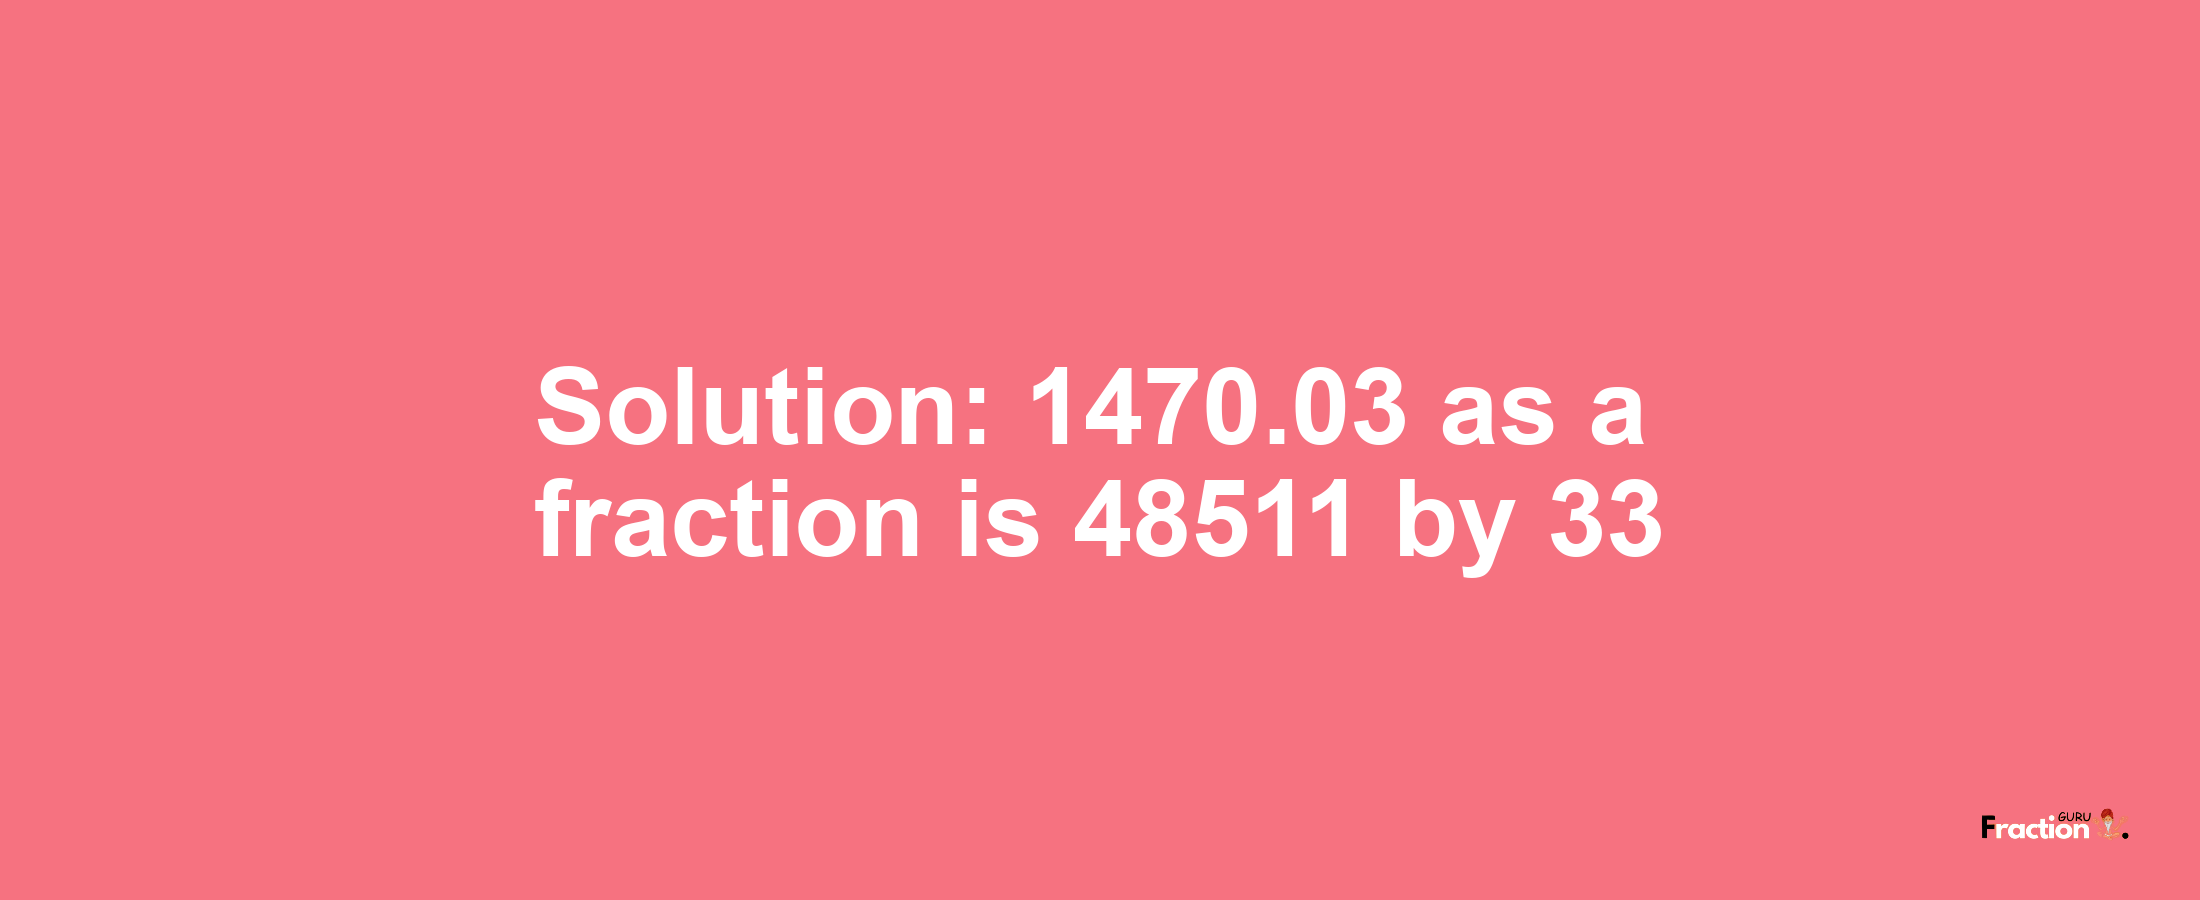 Solution:1470.03 as a fraction is 48511/33